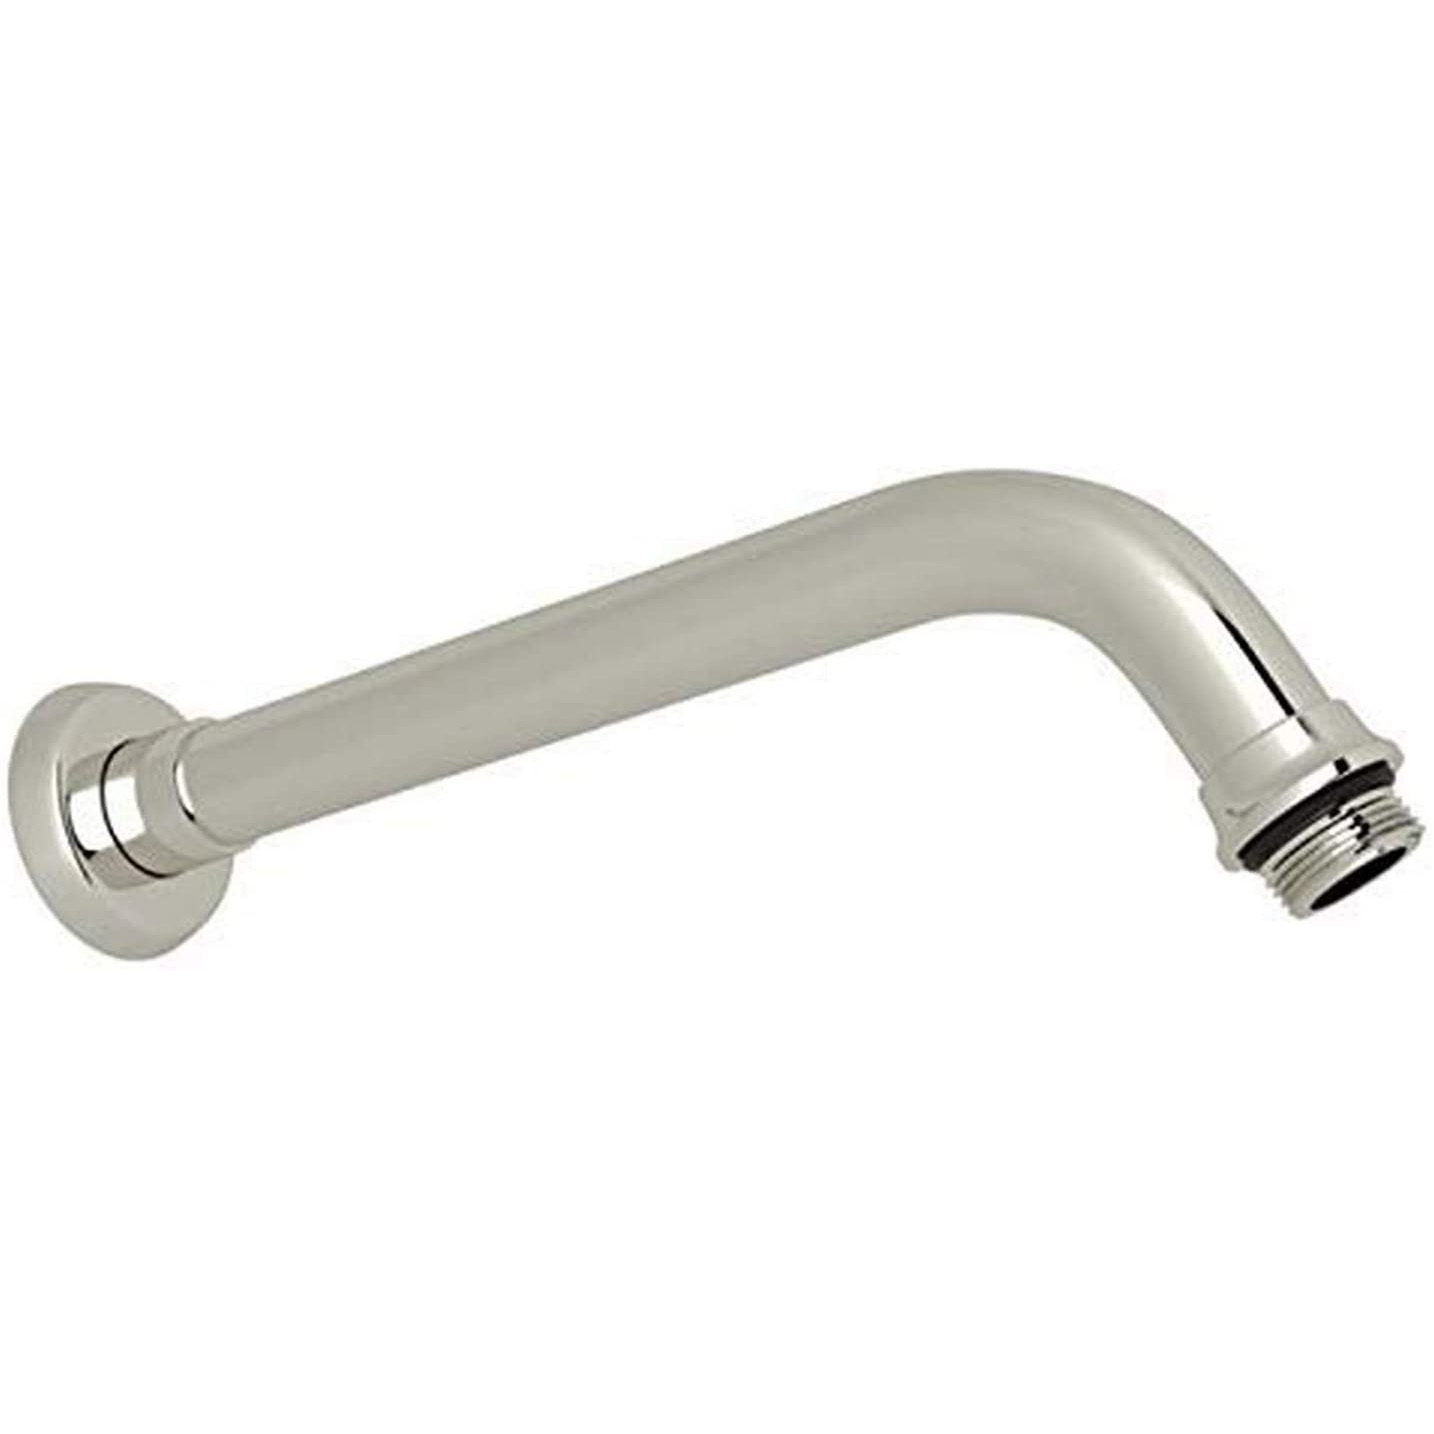 Perrin & Rowe Holborn Wall Mount Shower Arm & Flange In Polished Nickel